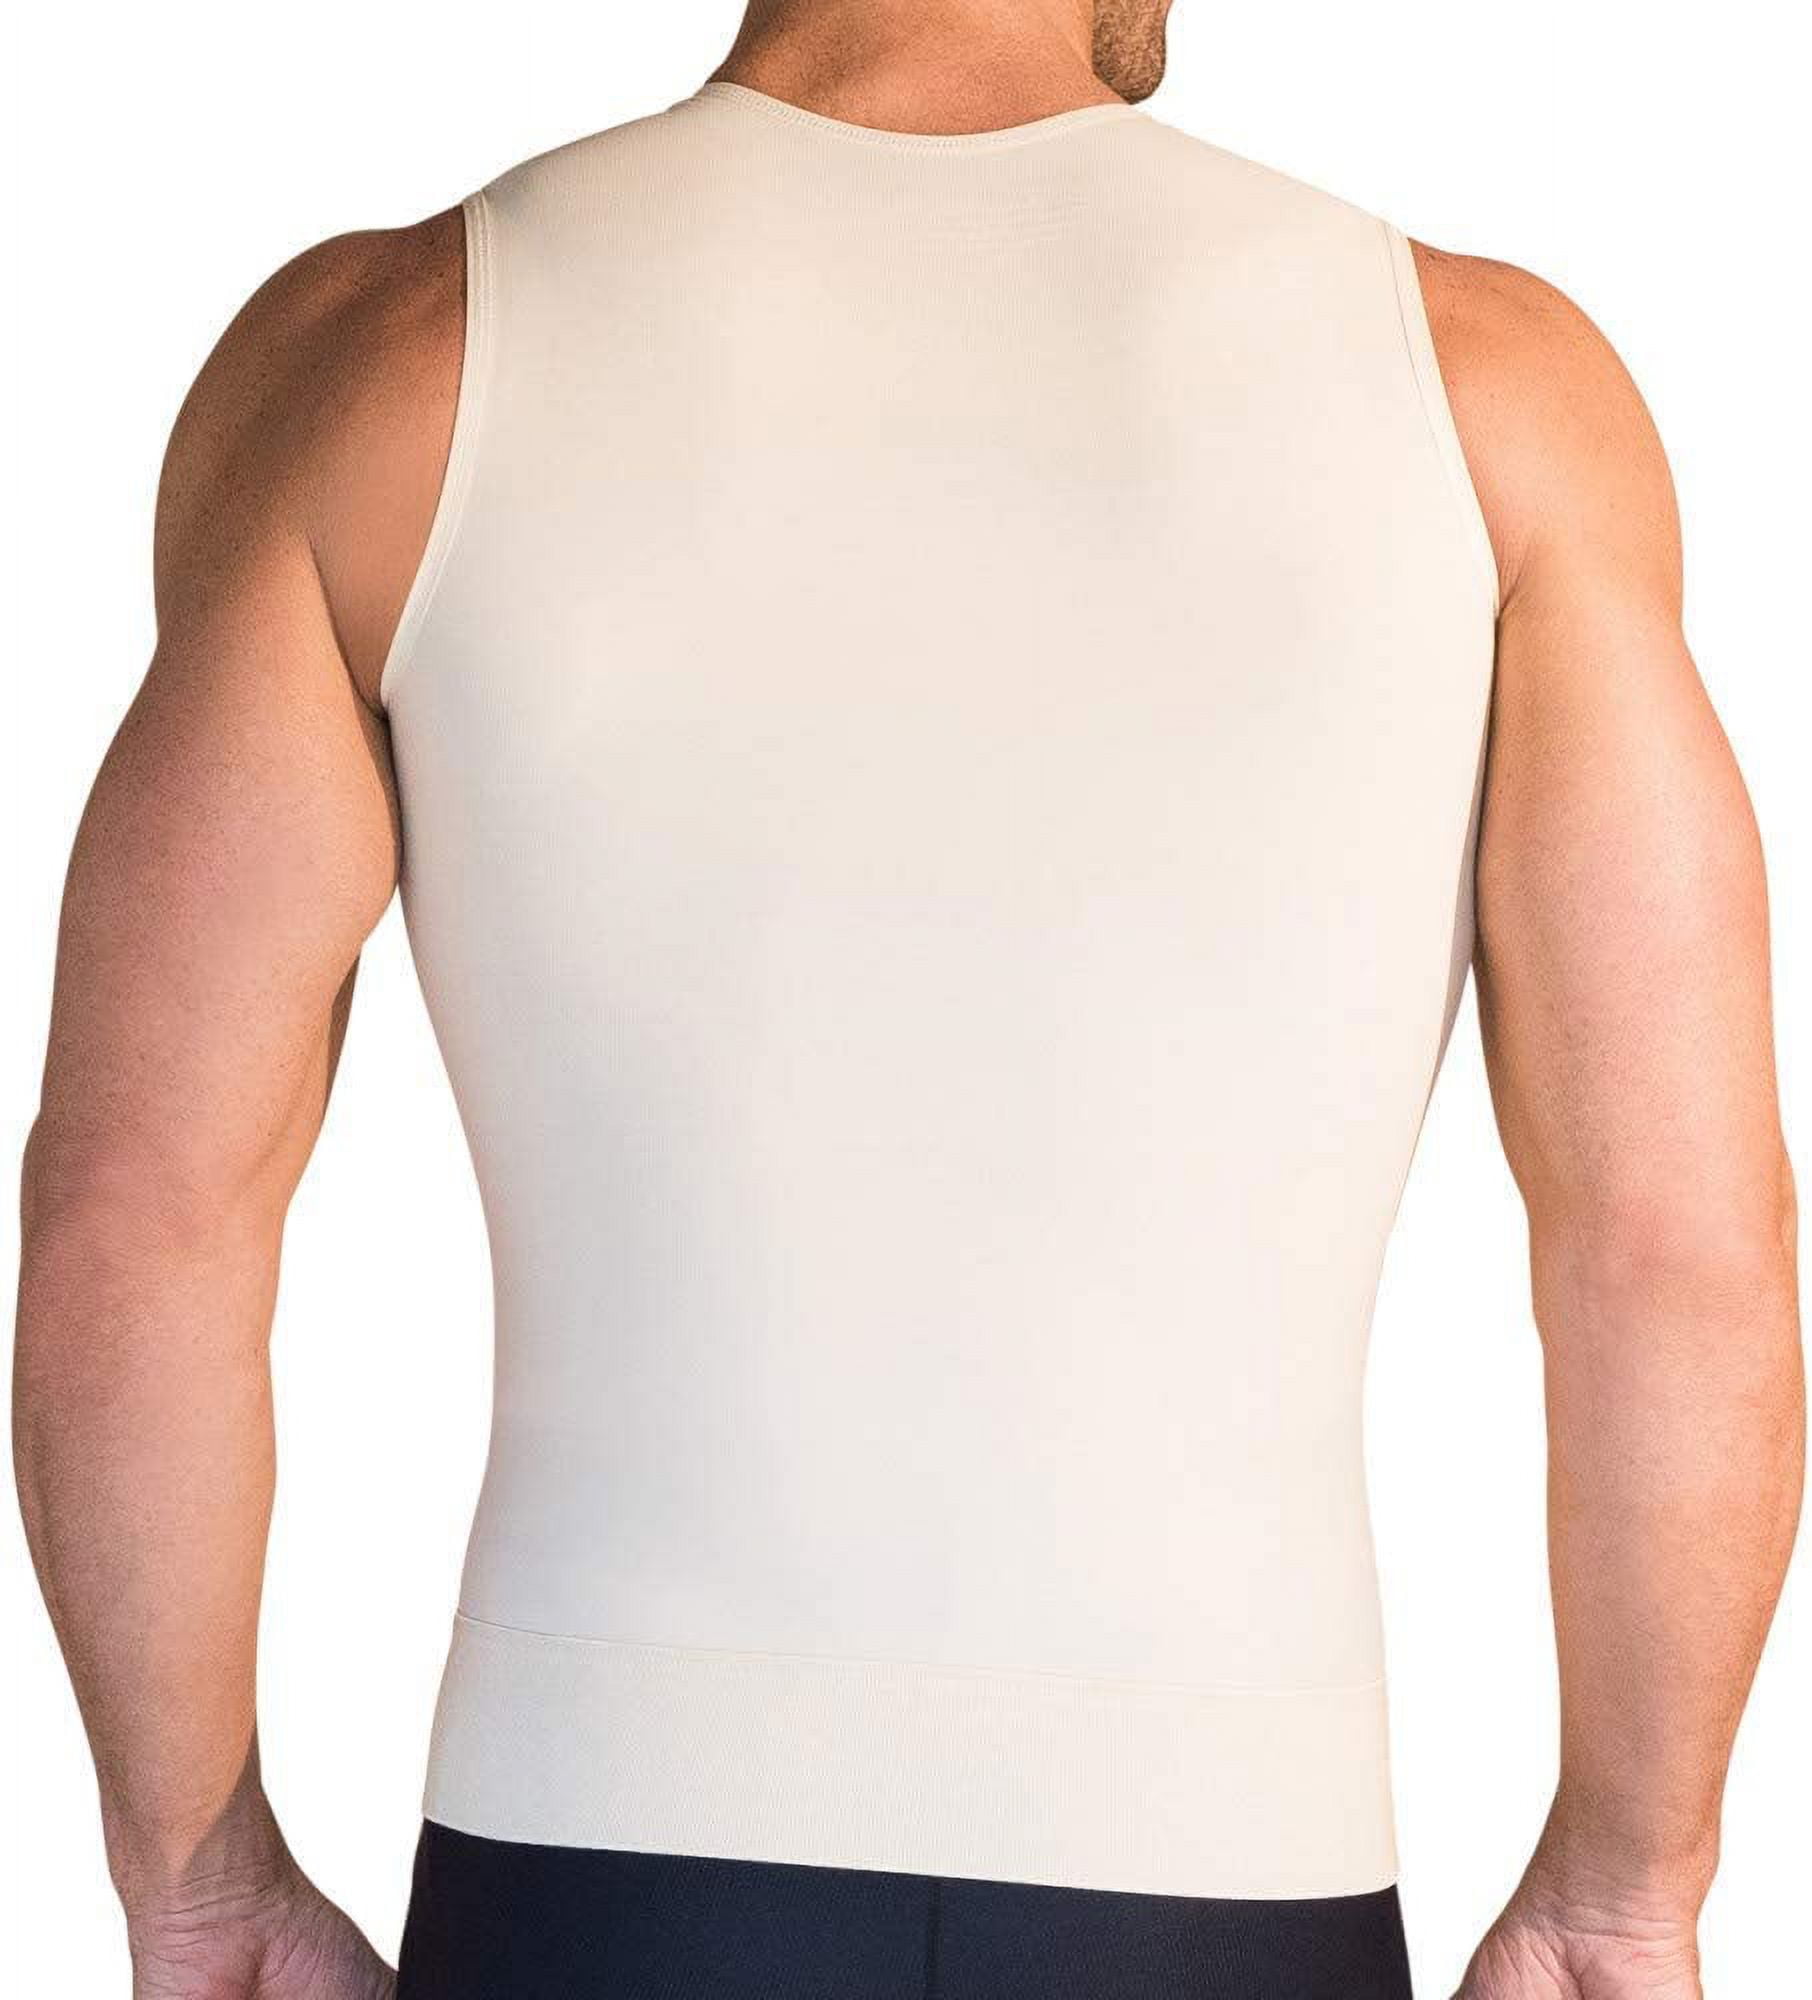  MARENA MV Recovery Men's Compression Vest Post-Surgical Support  - XL, Black : Clothing, Shoes & Jewelry